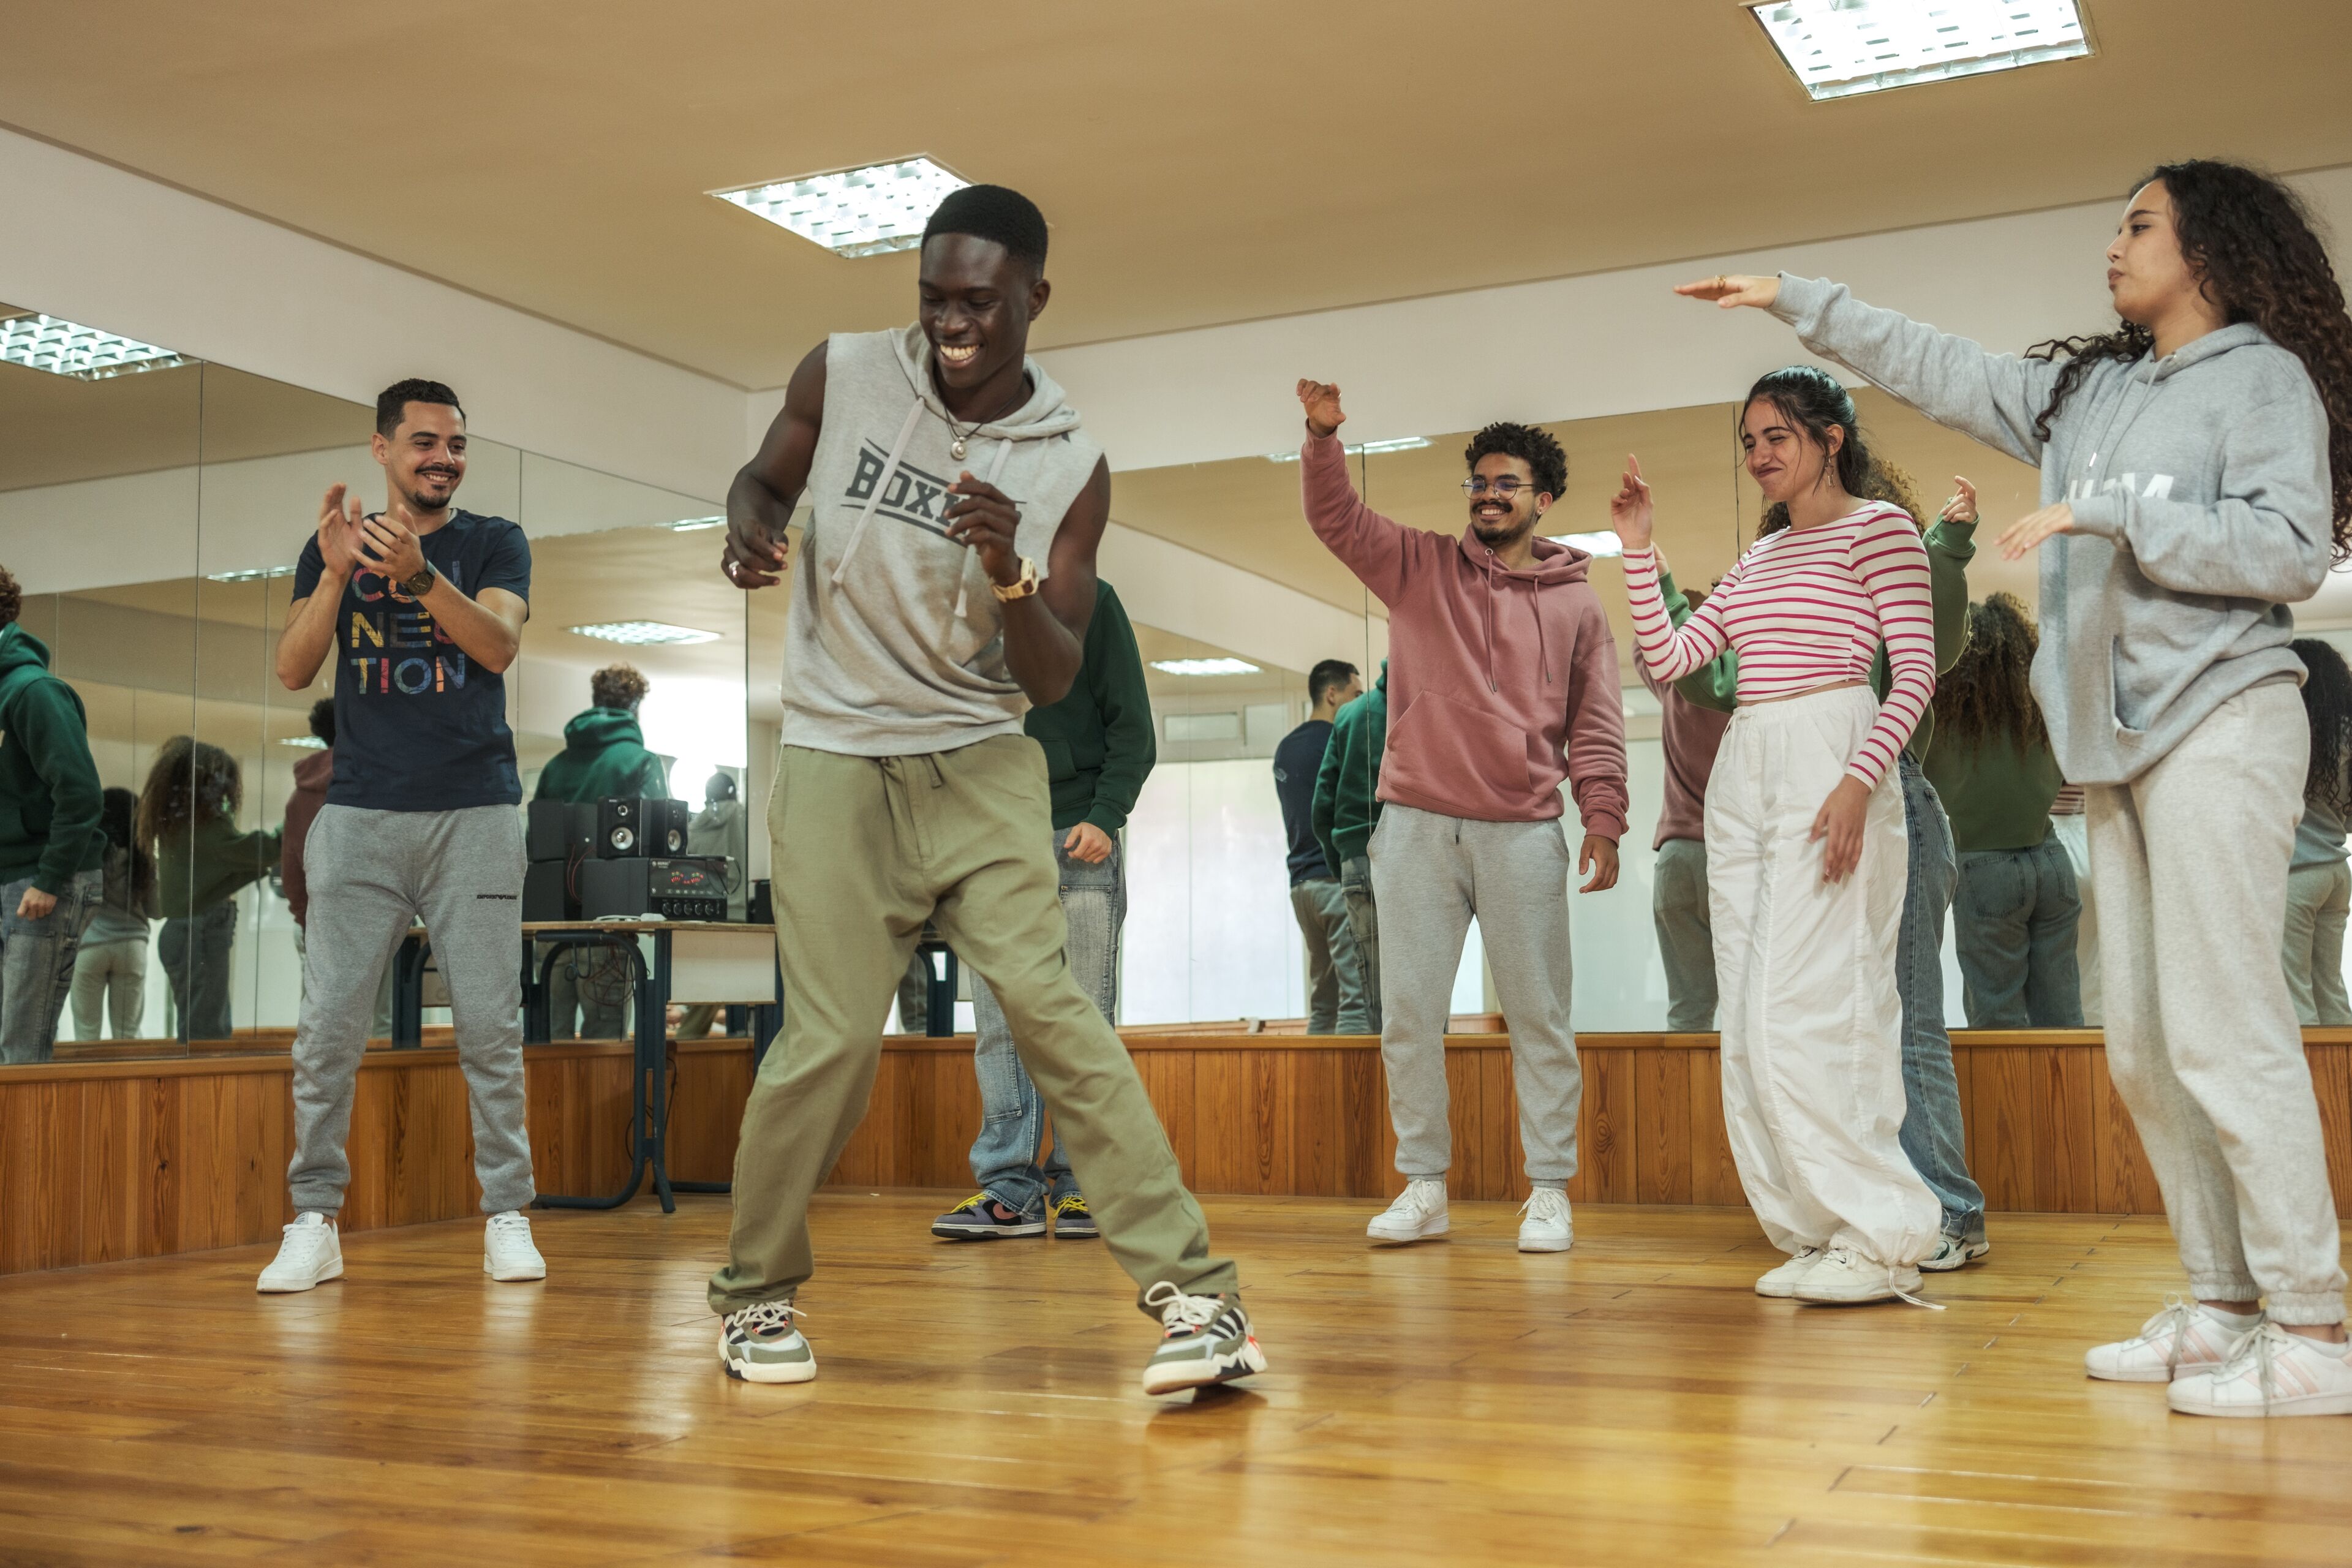 A group of people laughing and dancing in a dance studio, with one person in the center enjoying the moment, reflecting a lively dance session.